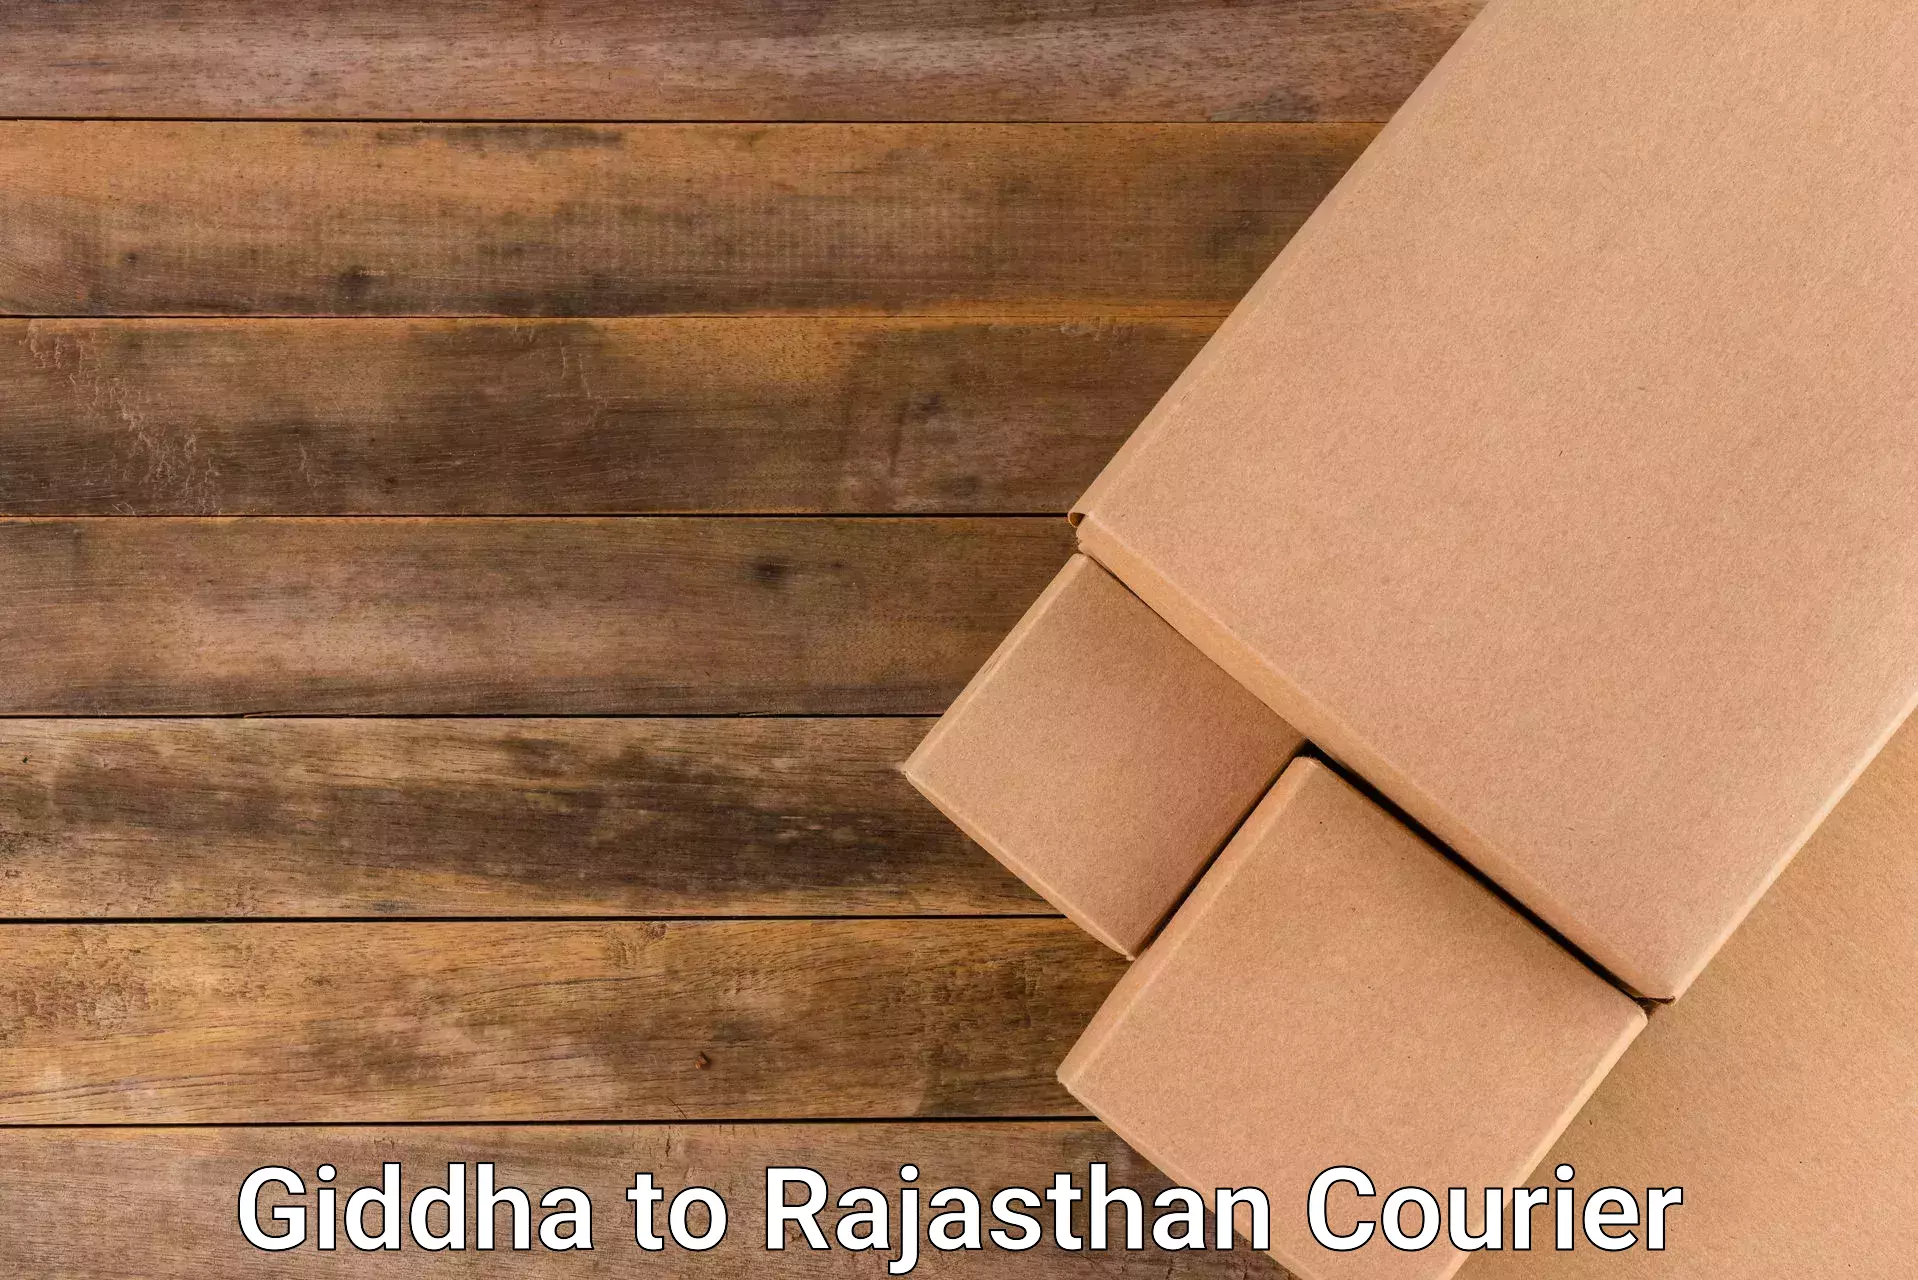 E-commerce logistics support Giddha to Udaipur